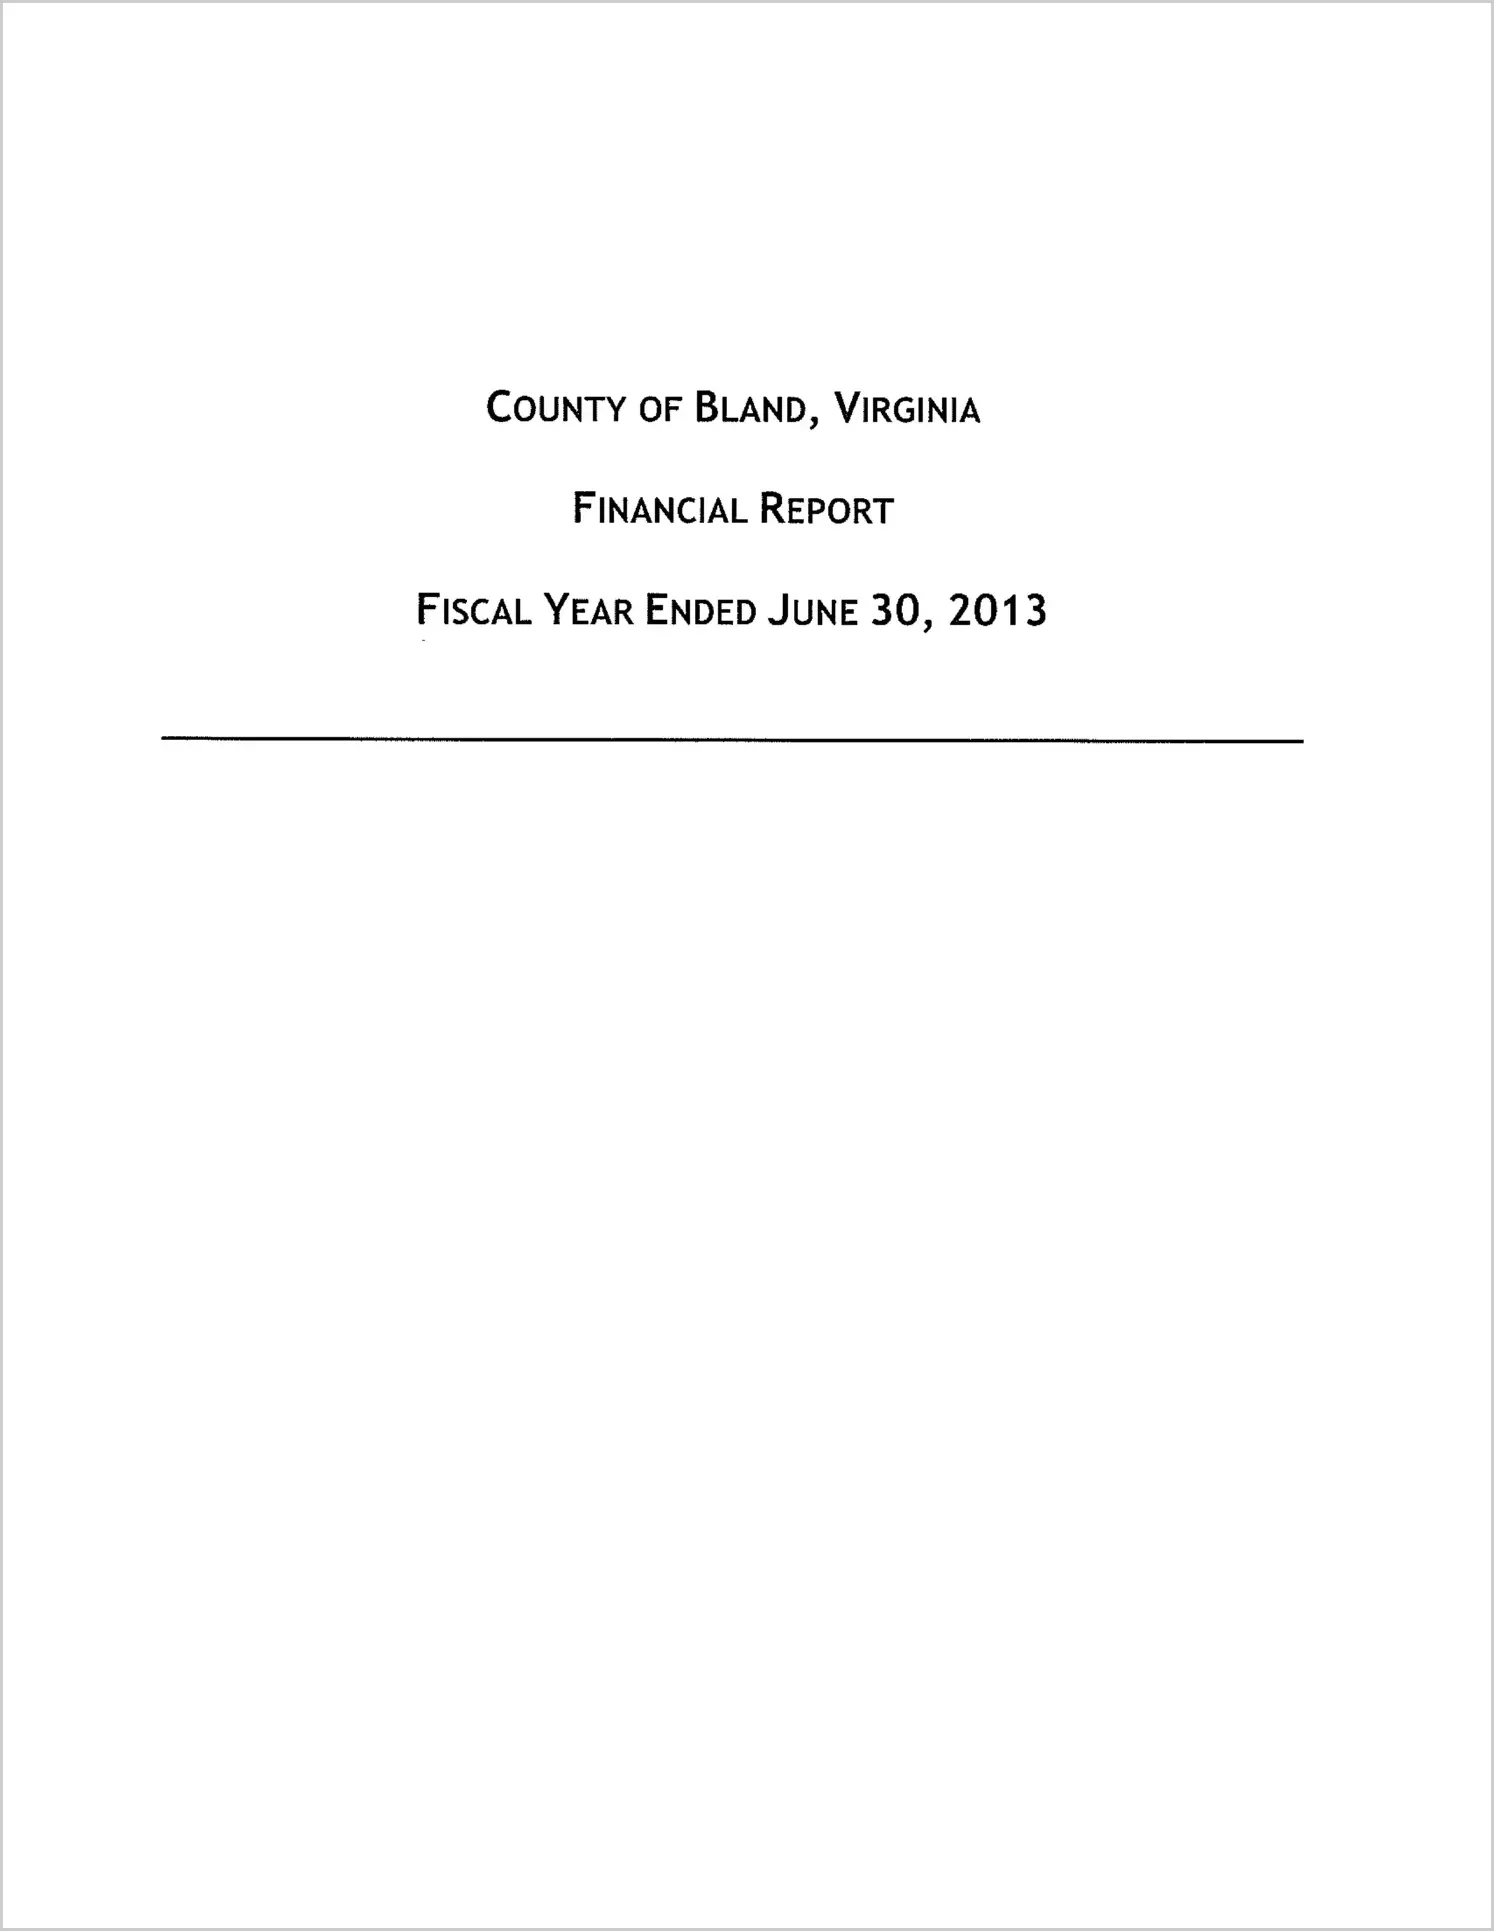 2013 Annual Financial Report for County of Bland